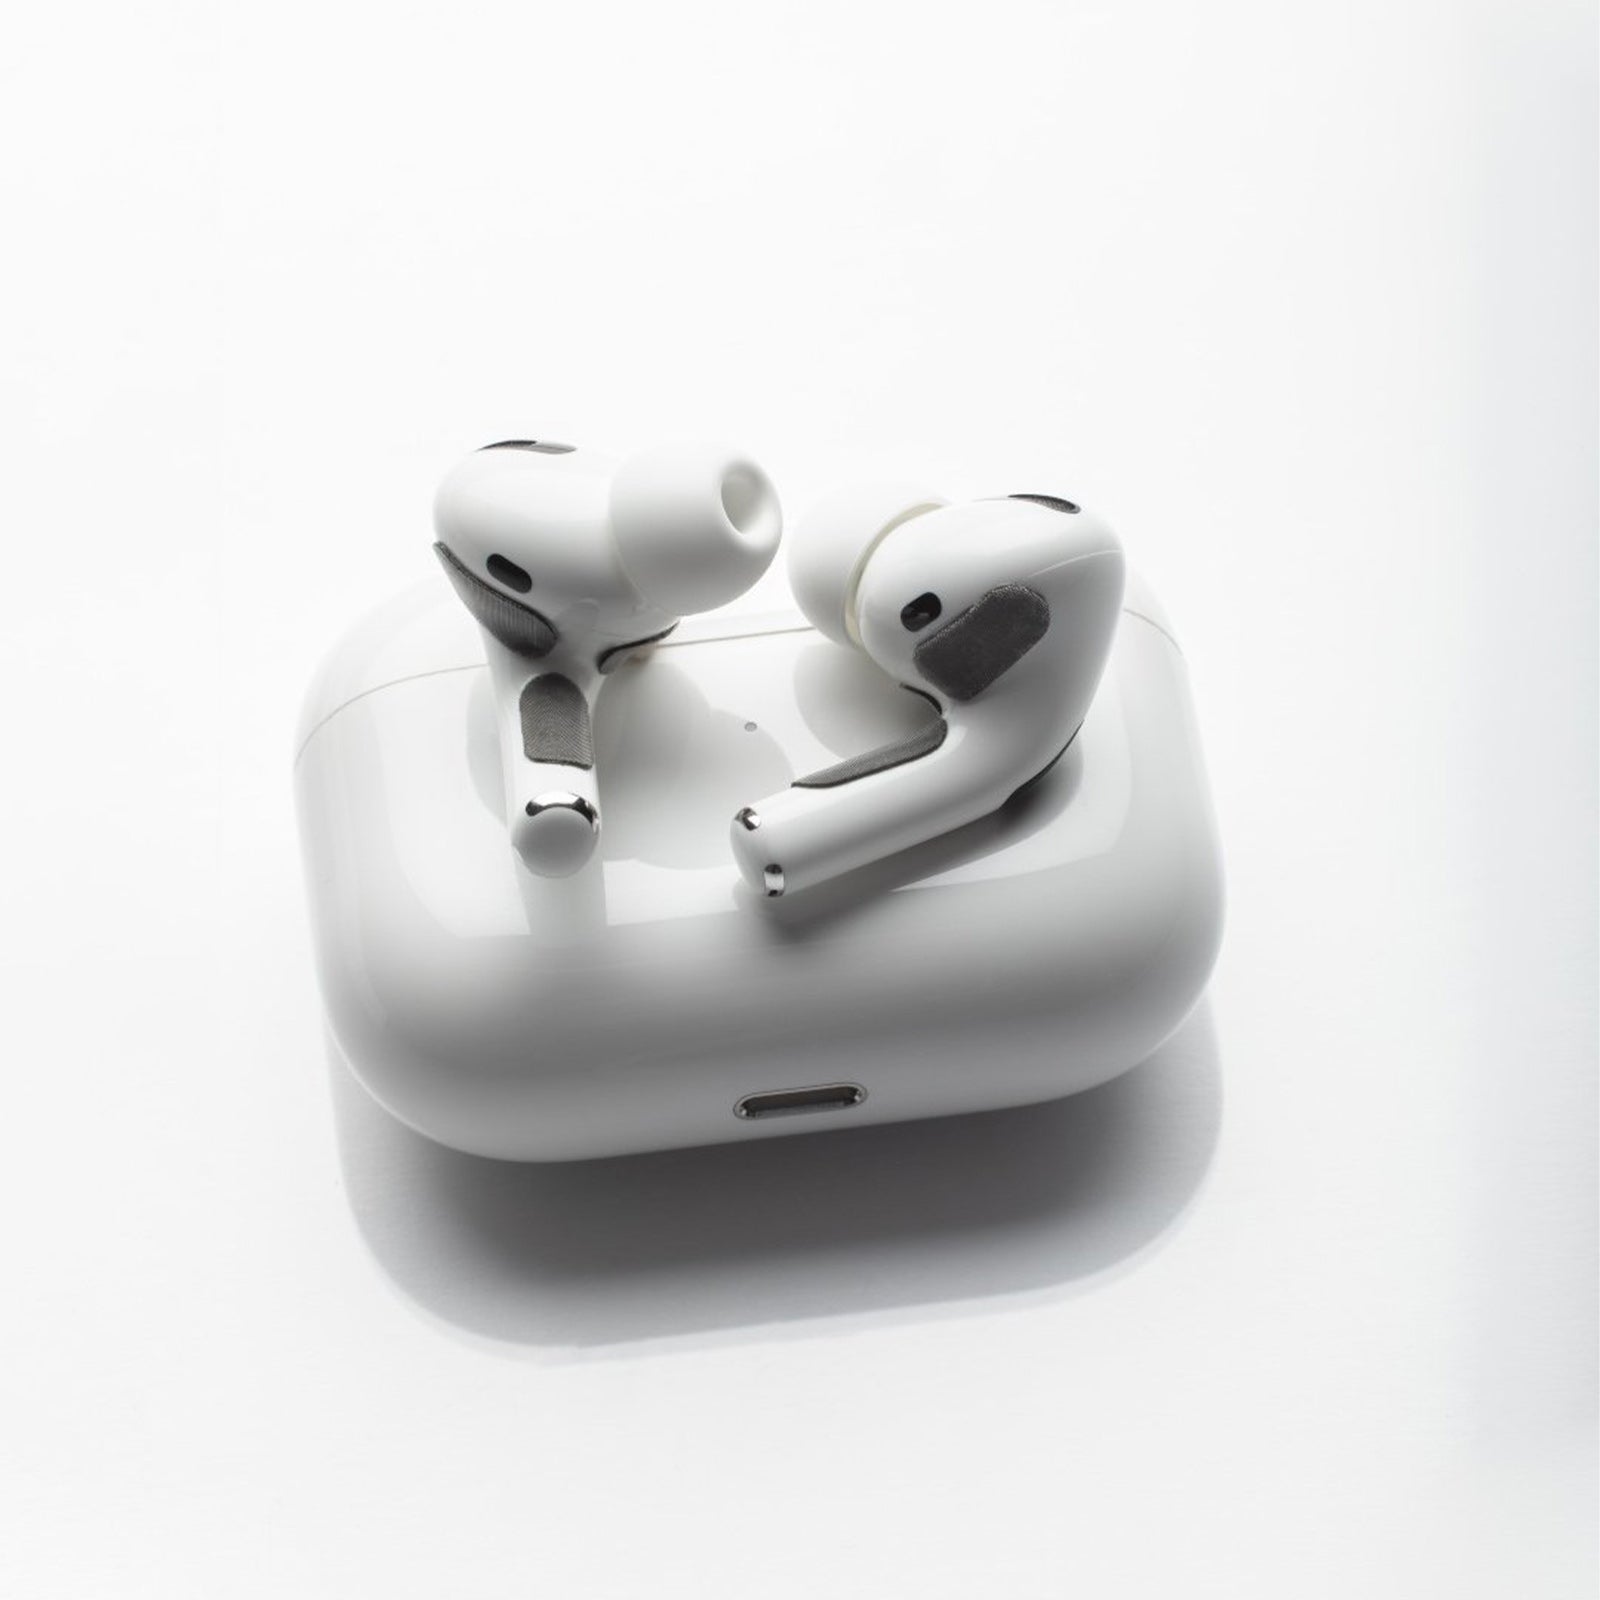 18 Best Apple AirPods Accessories and Cases 2020